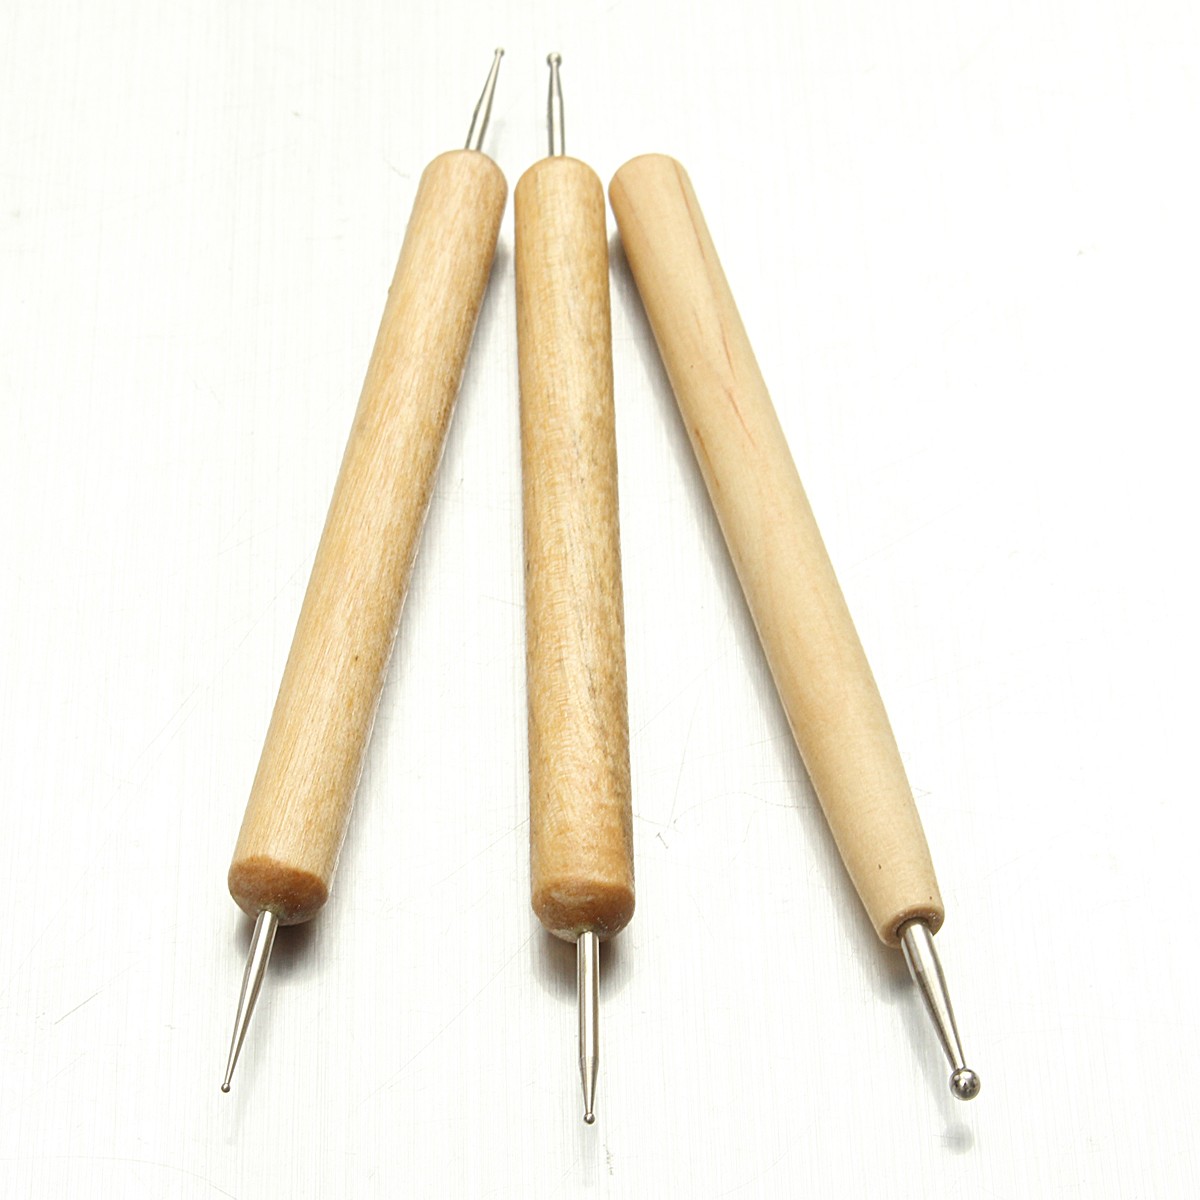 

3 Pcs Clay Sculpting Set Wax Carving Pottery Tools DIY Polymer Modeling Shapers